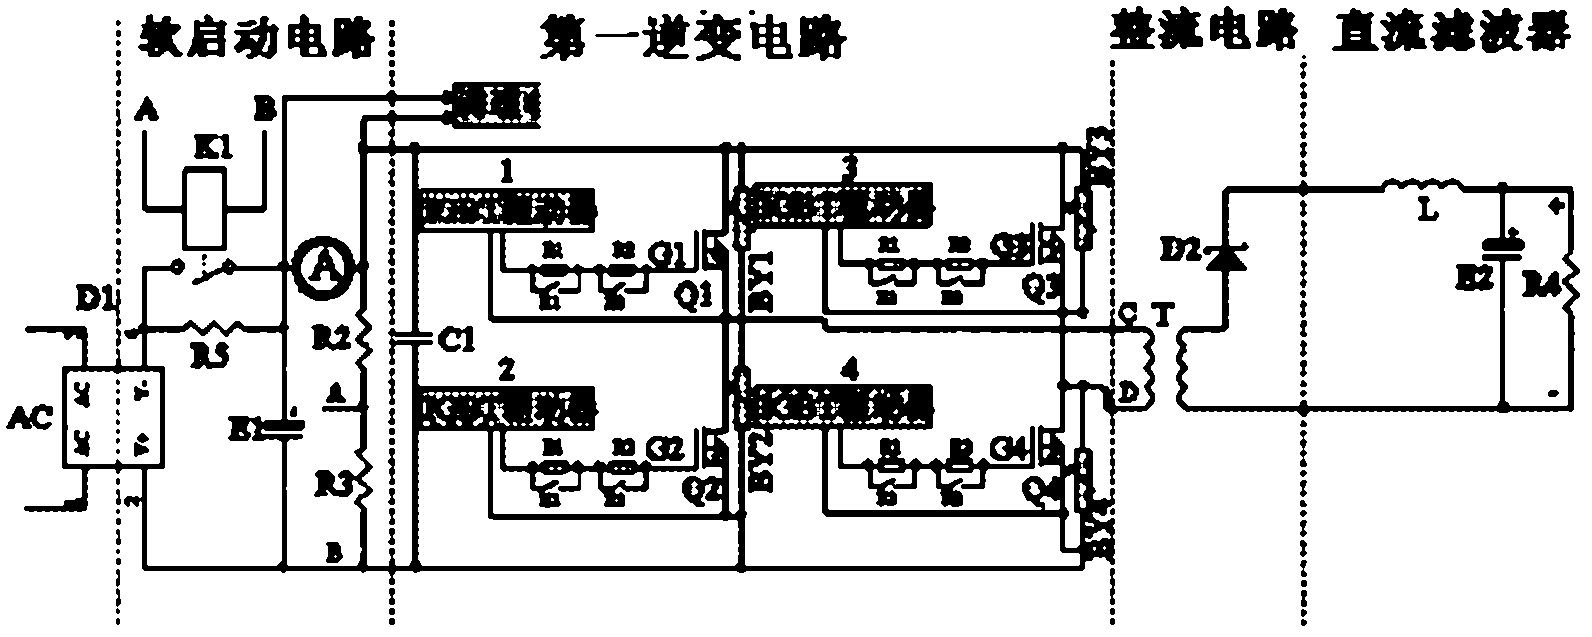 Digital phase-shift circuit and improved AC (Alternating Current) power source thereof